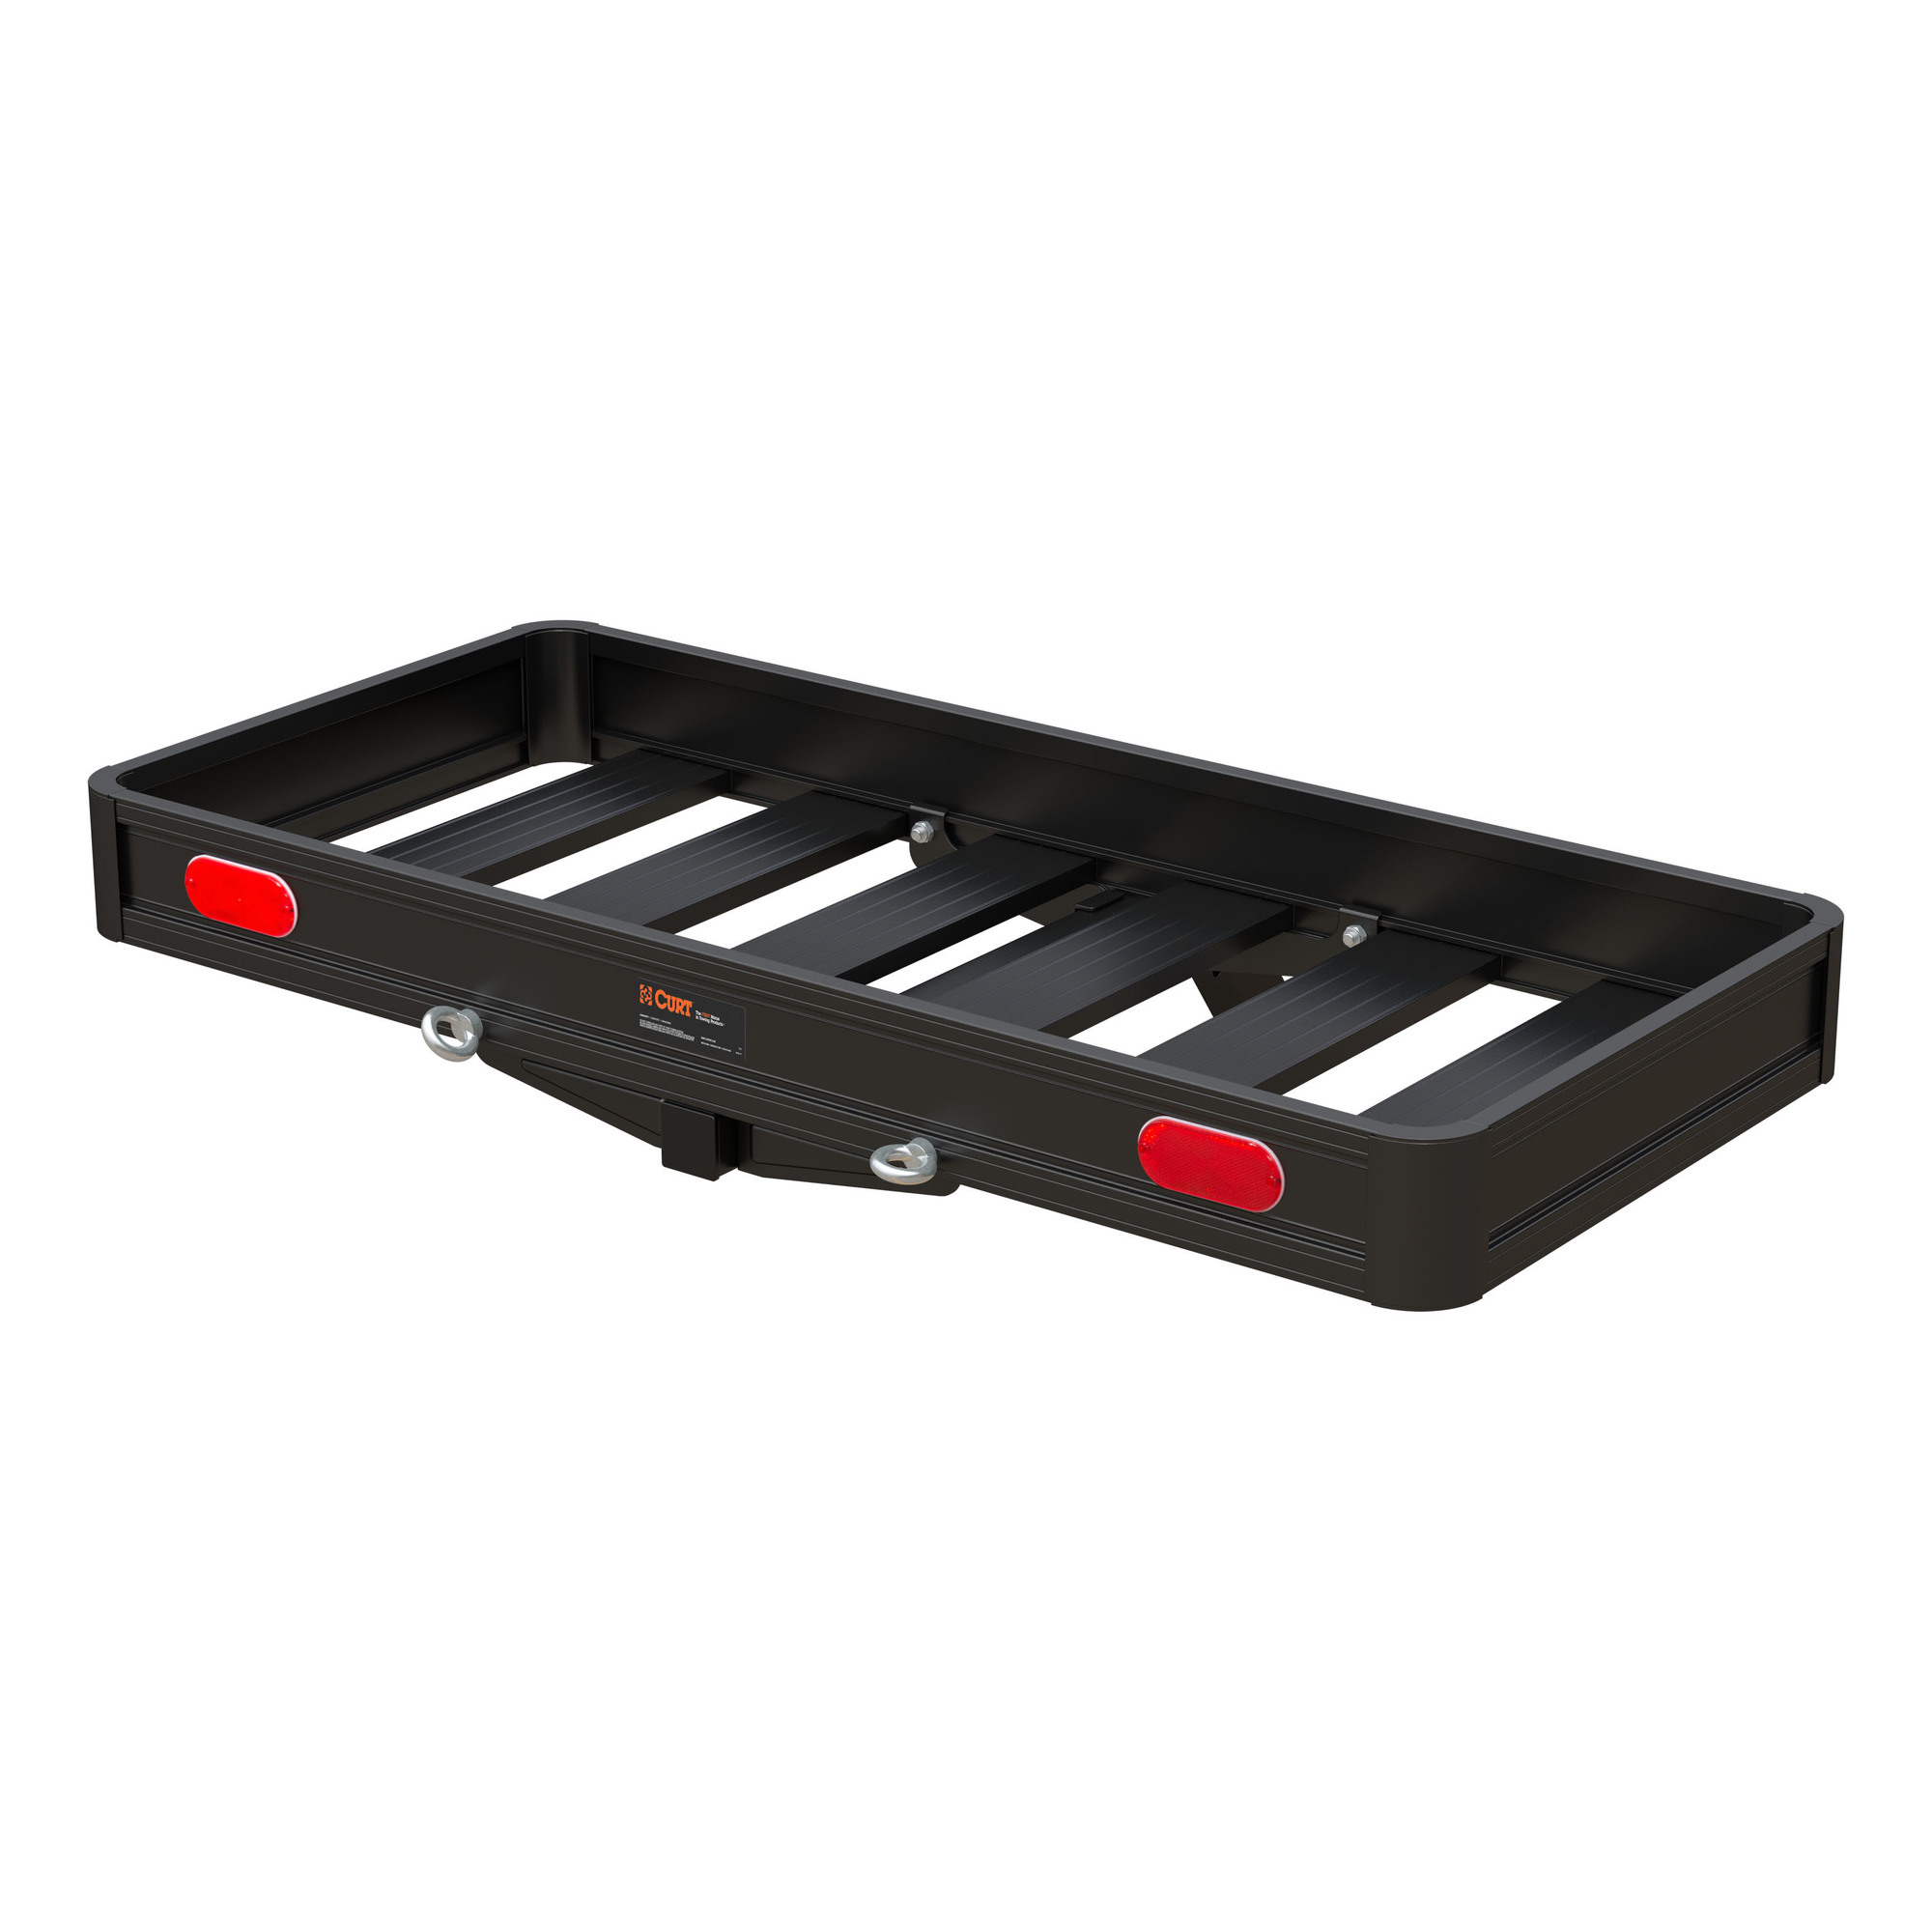 Curt Manufacturing, Activelink Cargo Carrier, Capacity 500 lb, Receiver Size 2 in, Material Aluminum, Model 18415